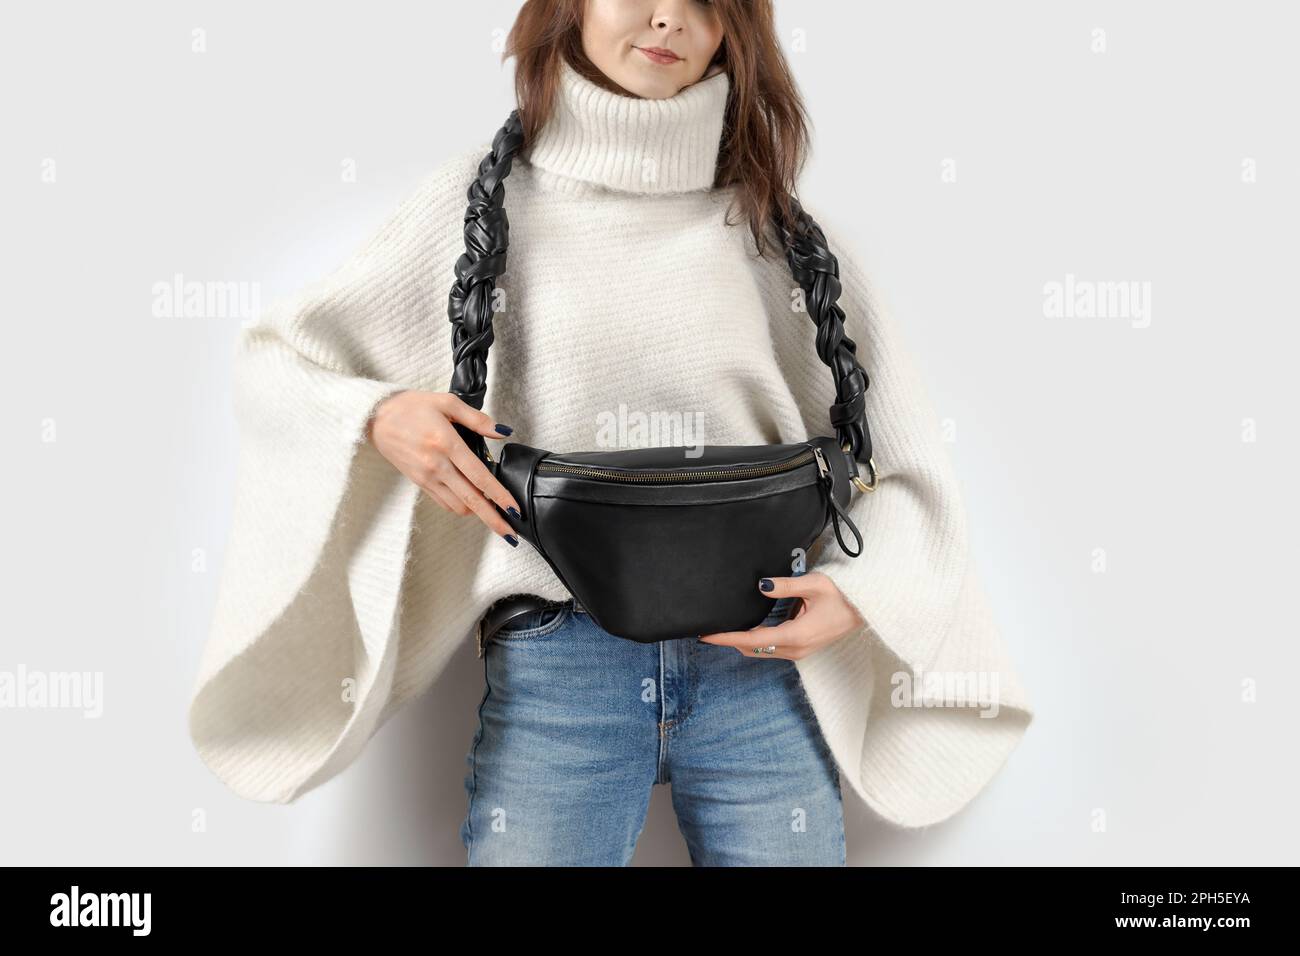 Woman Showing Black Genuine Leather Fanny Pack with Beautful Braided Strap. Handmade Leather Accessories Goods Stock Photo